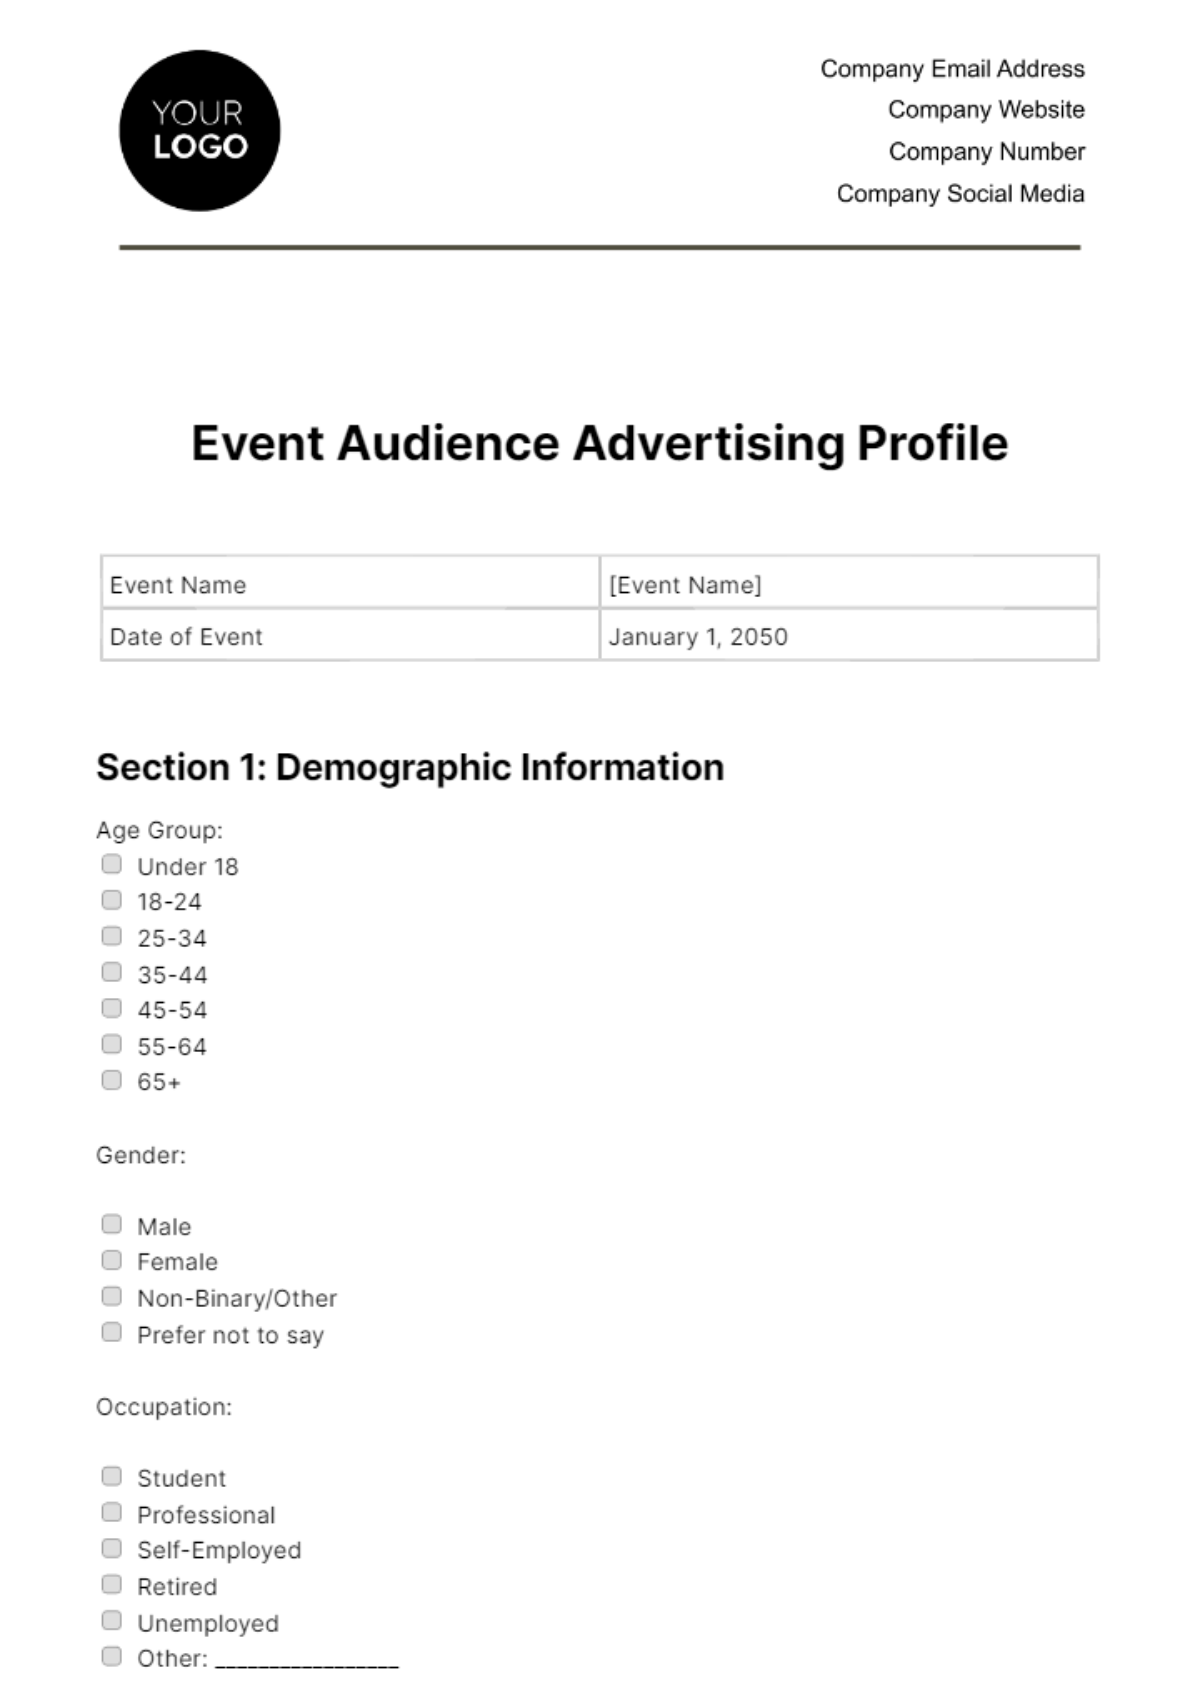 Event Audience Advertising Profile Template